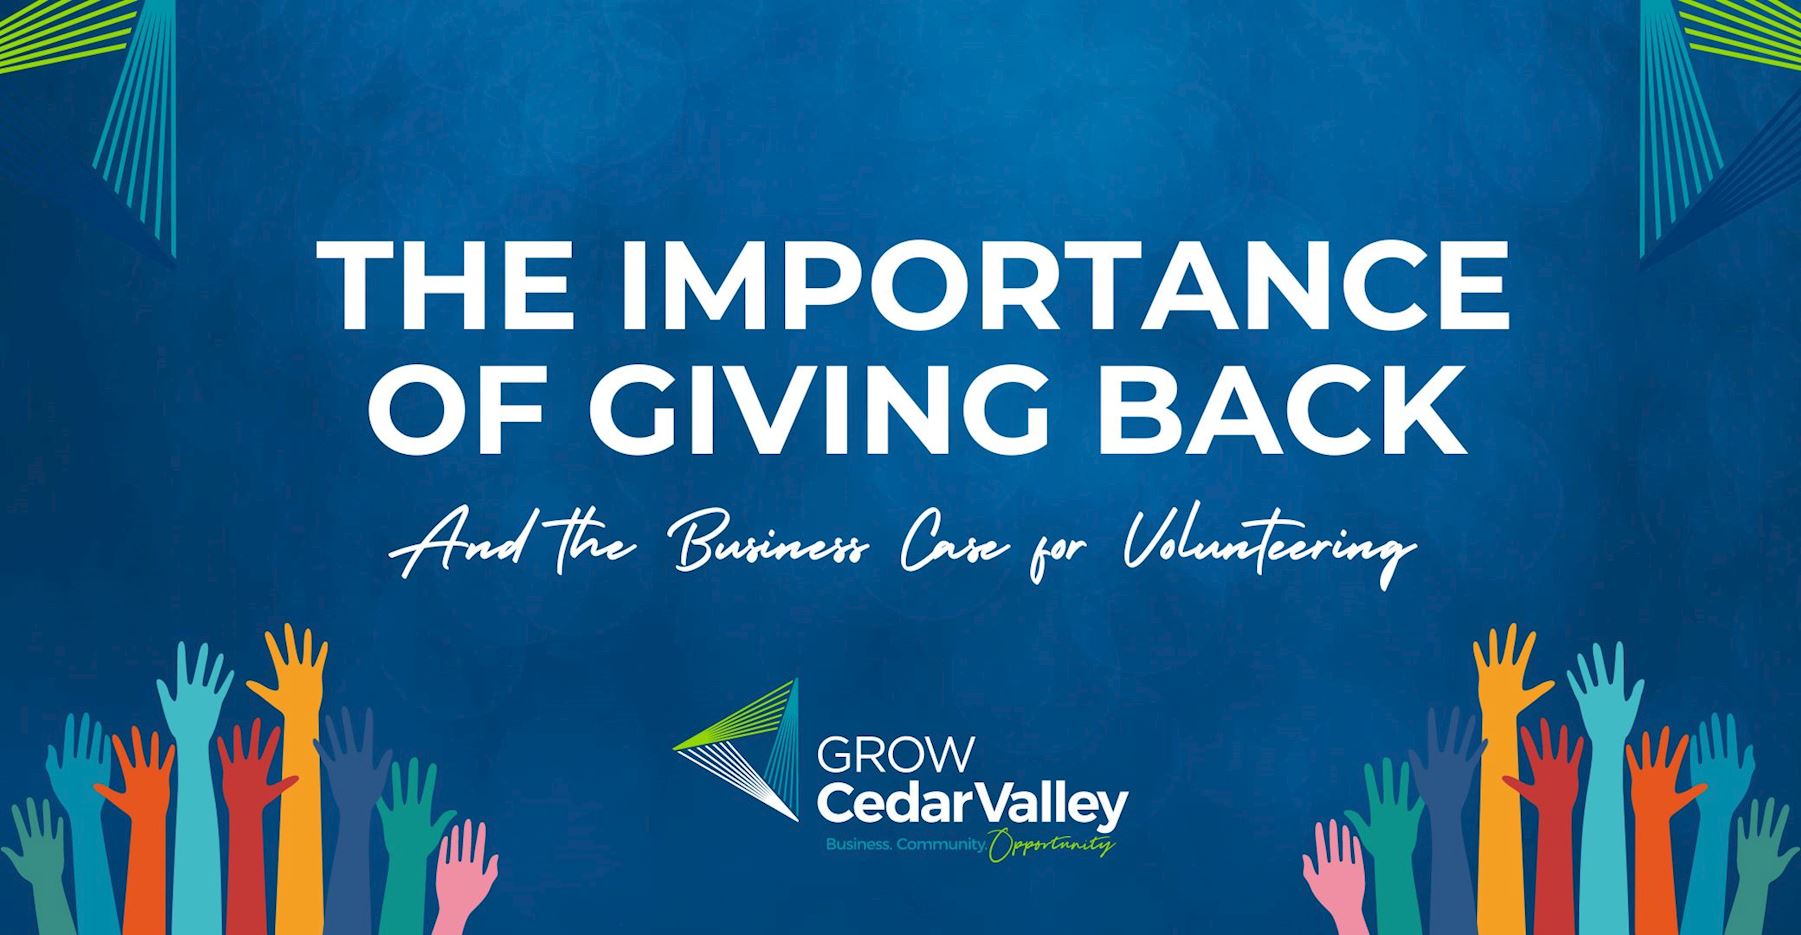 The Importance of Giving Back and the Business Case for Volunteering